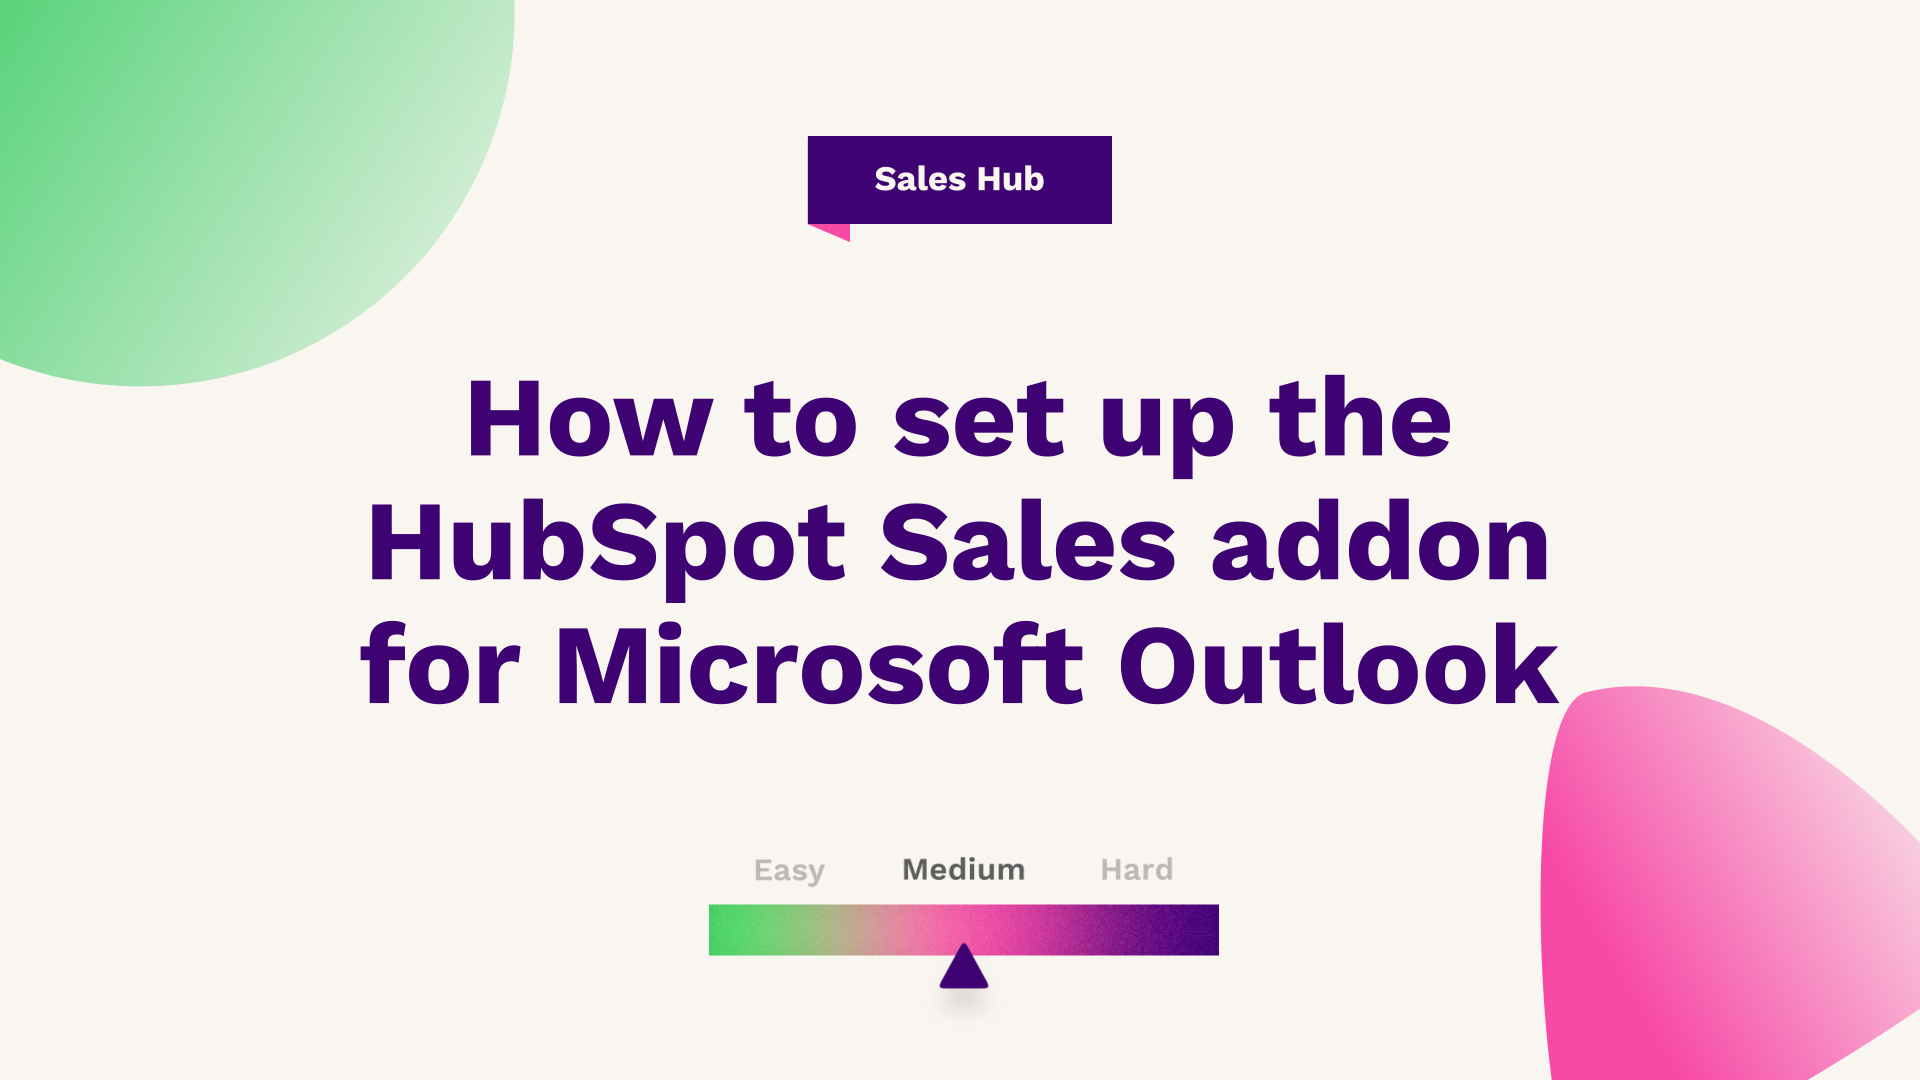 How to set up the HubSpot Sales addon for Microsoft Outlook